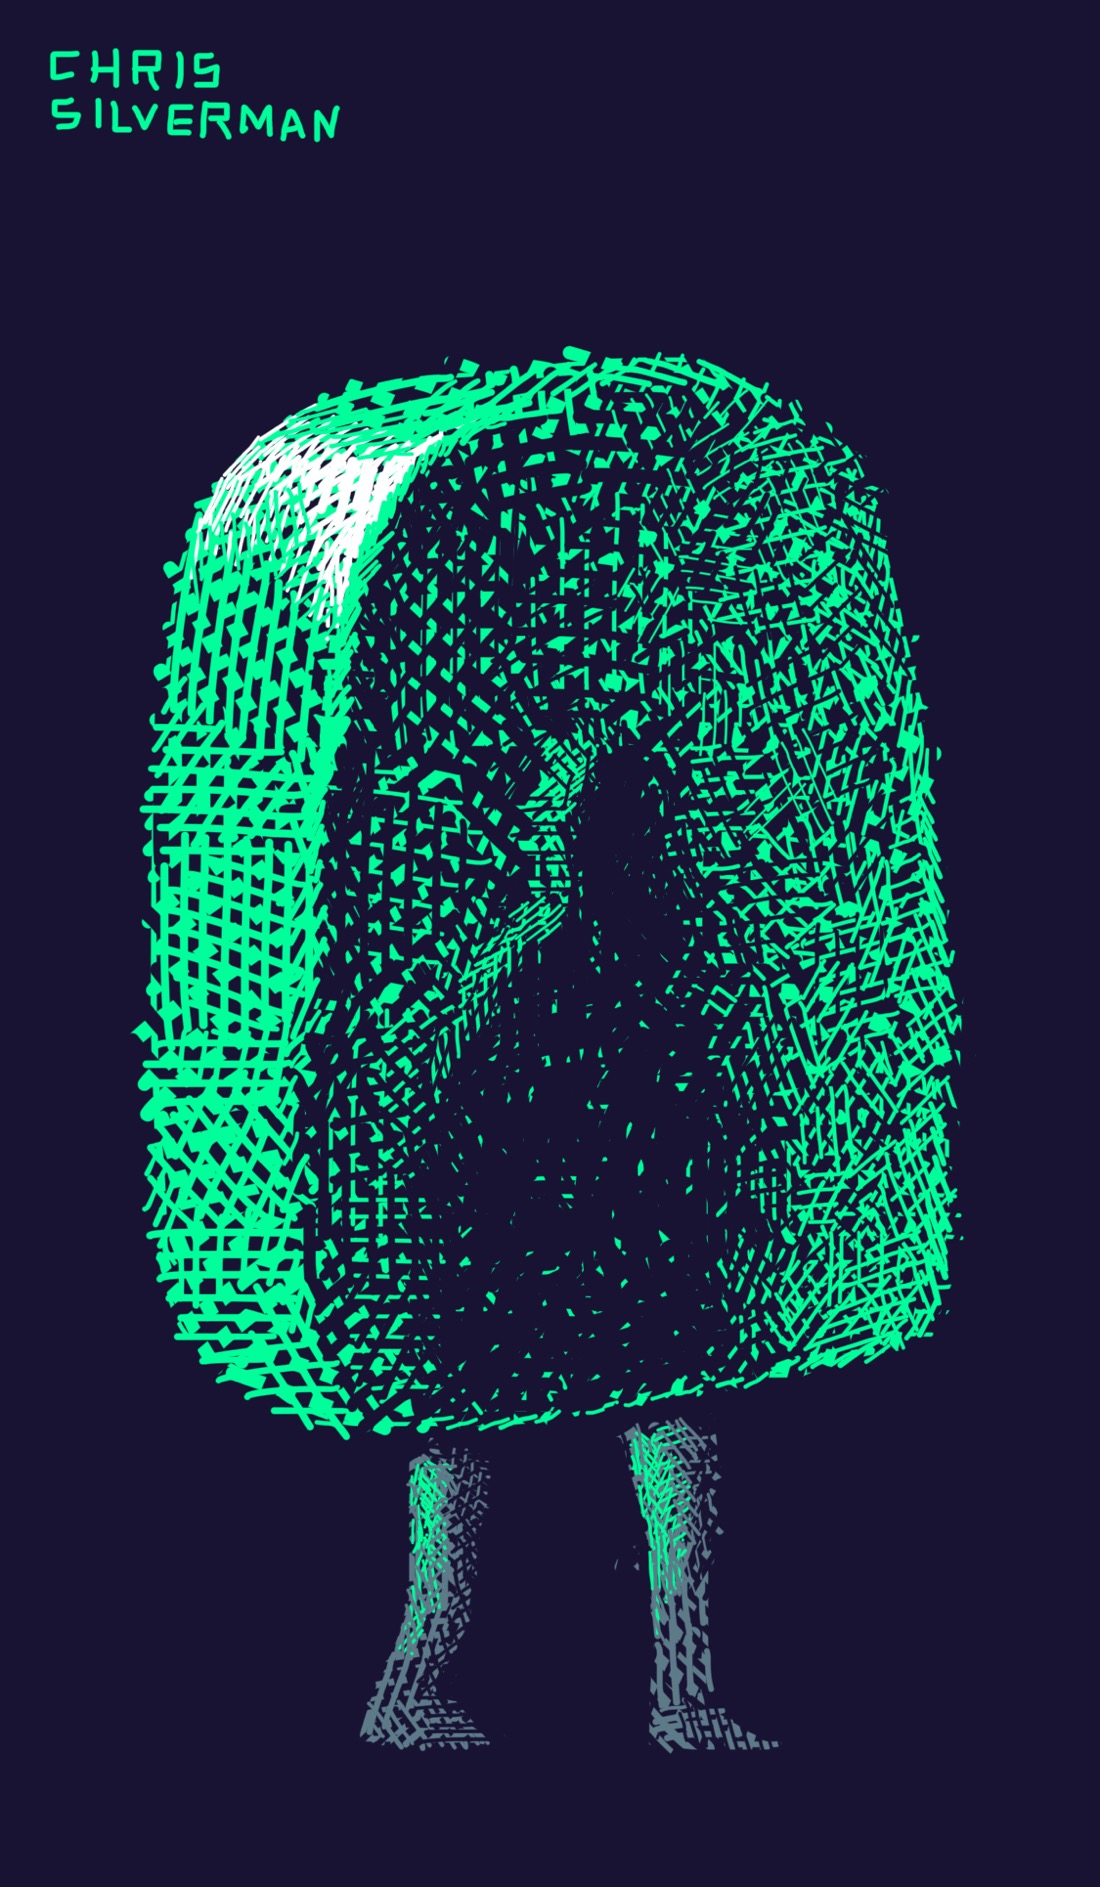 A large, green, translucent block: maybe ice, maybe soap, maybe Jell-O. A human figure is partly embedded in the block, from the waist up. No arms are visible, just the blurry form of the figure's upper body. The figure's two legs extend below the block. The effect is of a person wearing a very realistic popsicle costume. The drawing is glowing, radioactive-green ink on a black background. The legs of the figure are gray; the light reflecting off the popsicle is white.